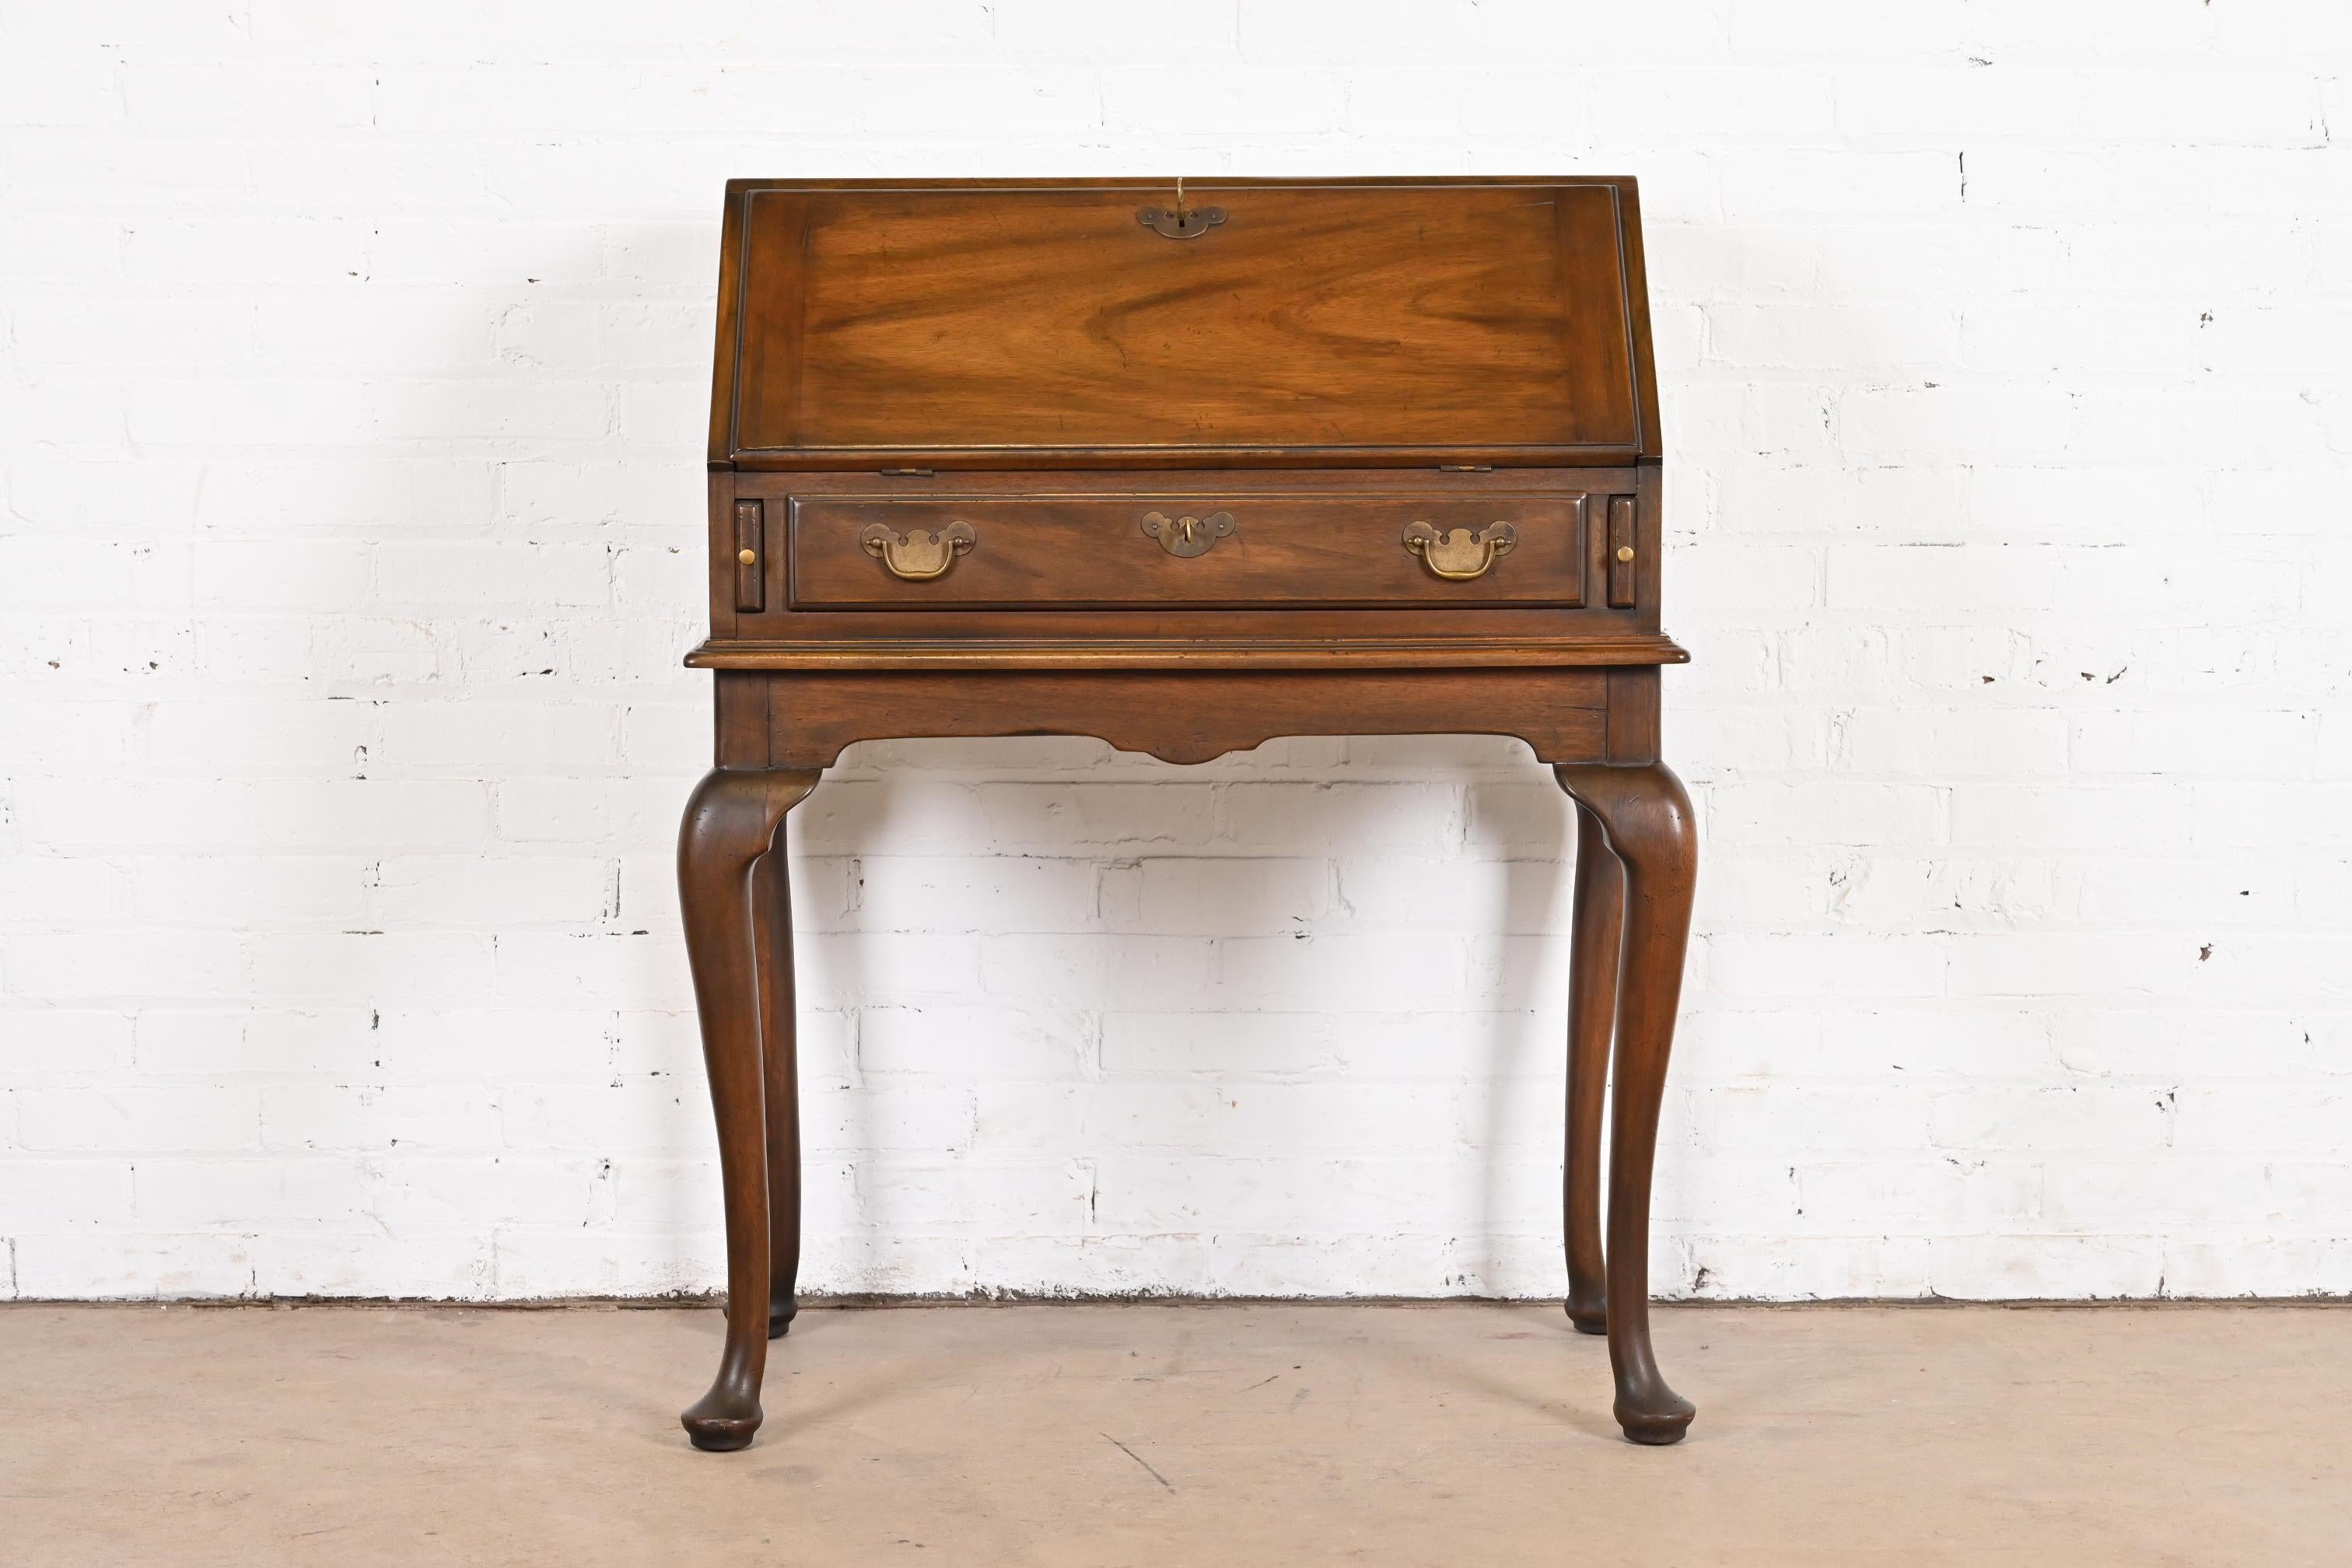 A gorgeous Queen Anne or Georgian style Lady Astor slant front writing desk

By Henkel Harris

USA, Circa 1970s

Solid mahogany, with original brass hardware. Desk locks, and key is included.

Measures: 31